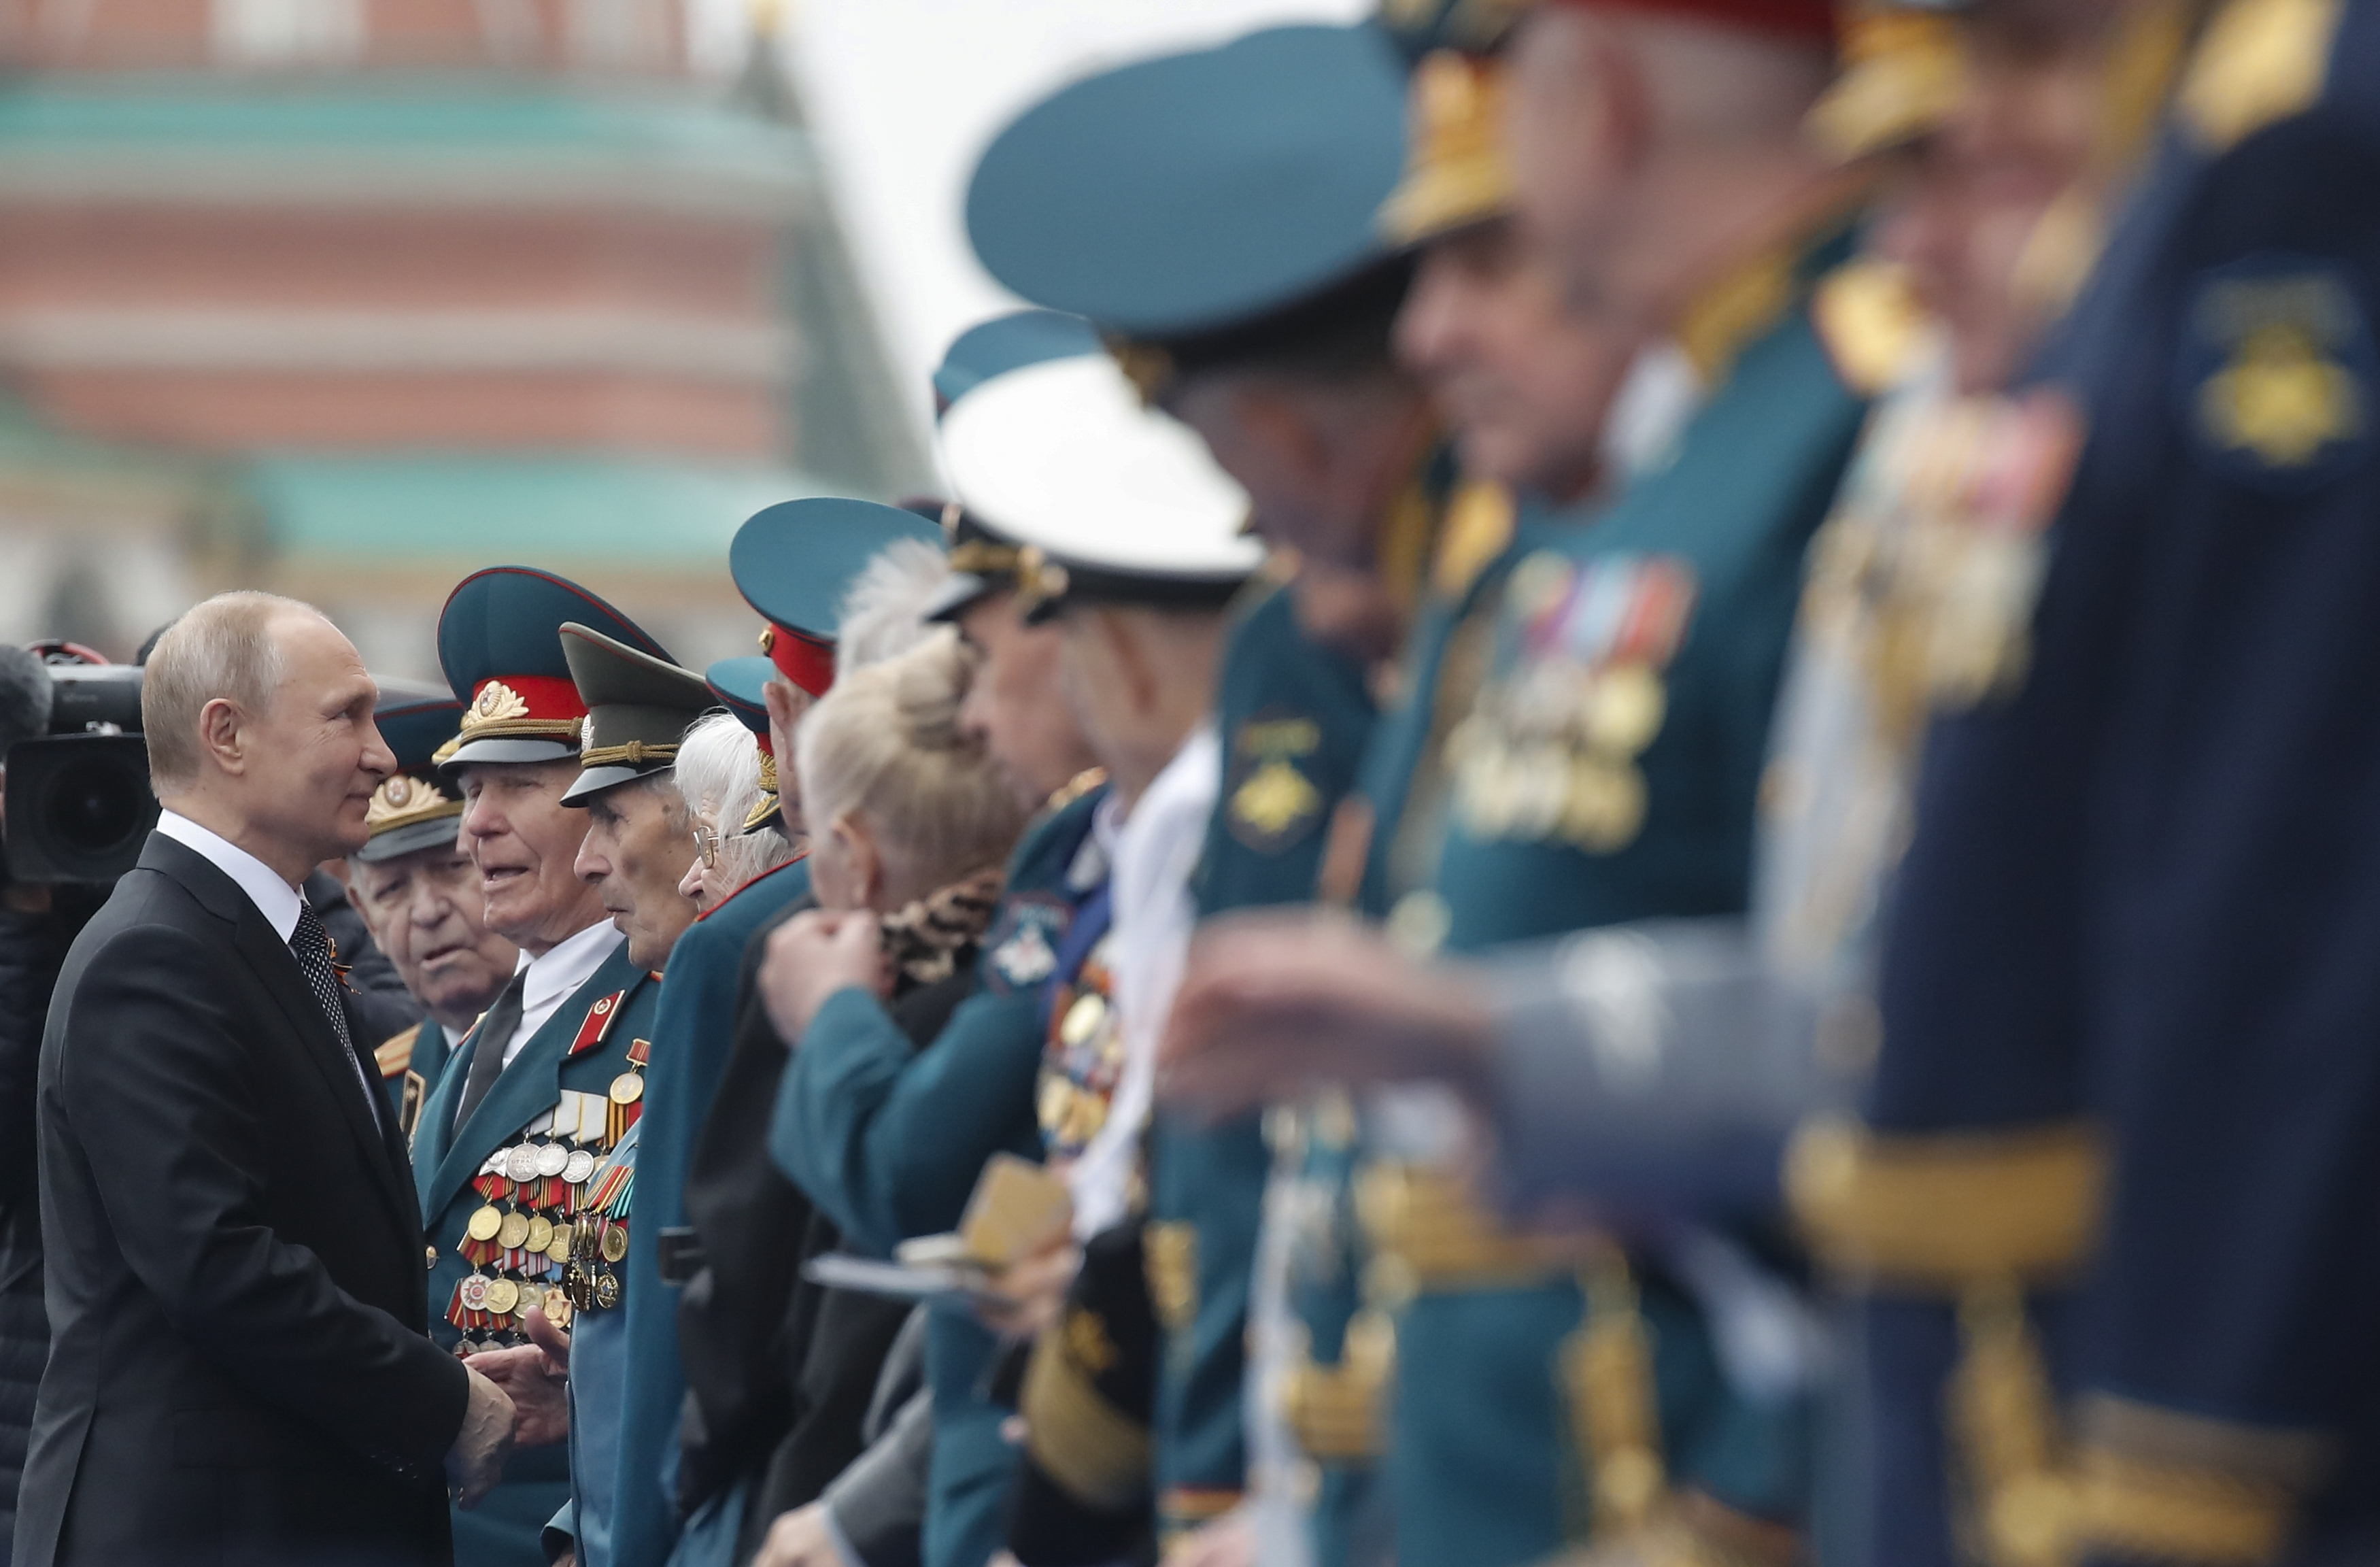 2019-05-09T085528Z_999506799_UP1EF590OSG52_RTRMADP_3_WW2-ANNIVERSARY-RUSSIA-PARADE